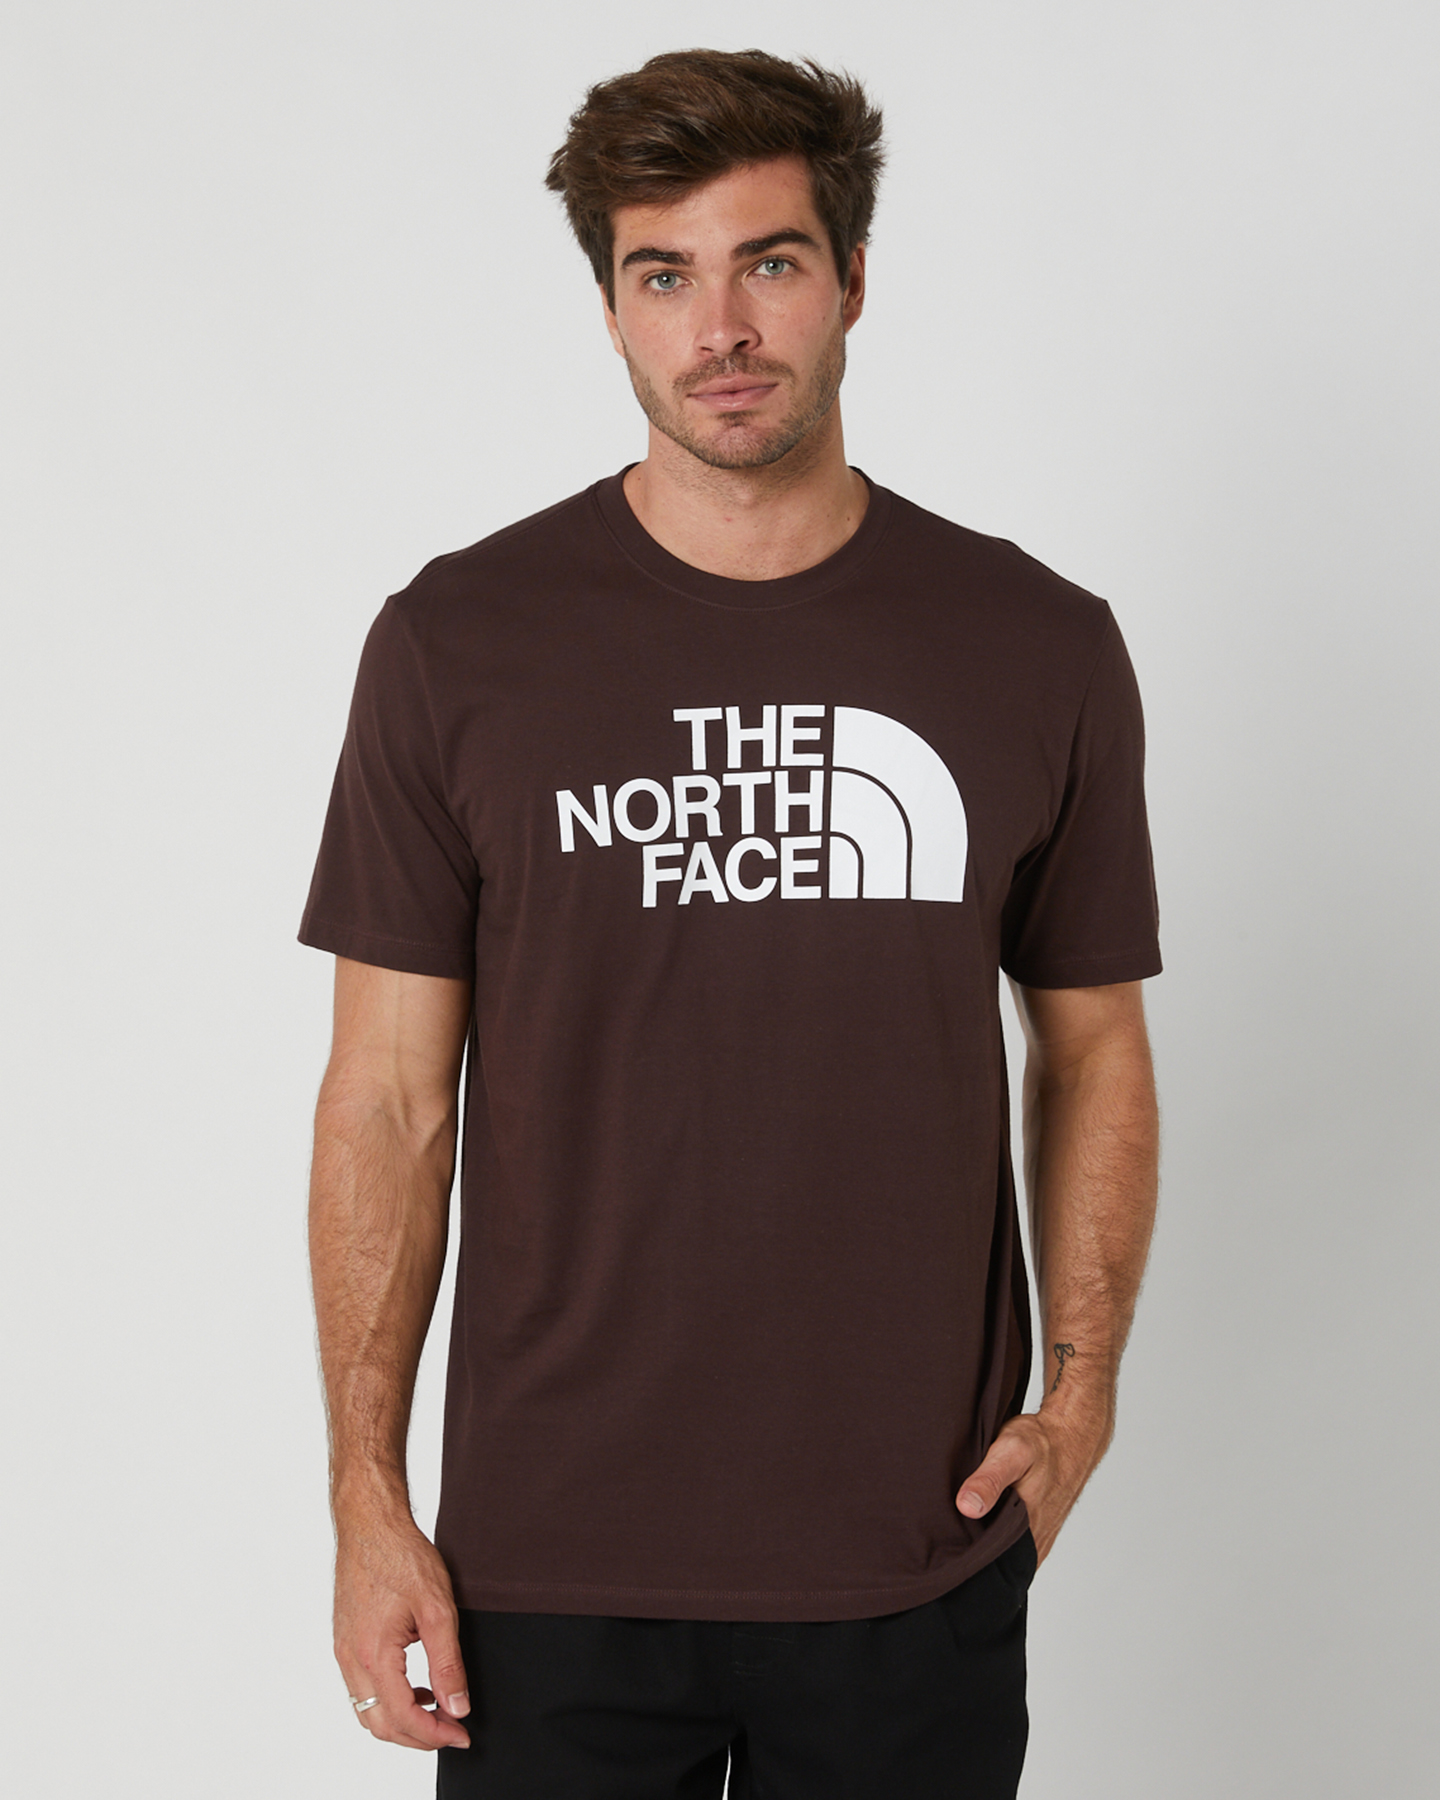 The North Face Men's T-Shirt Short Sleeve Half Dome Small Logo